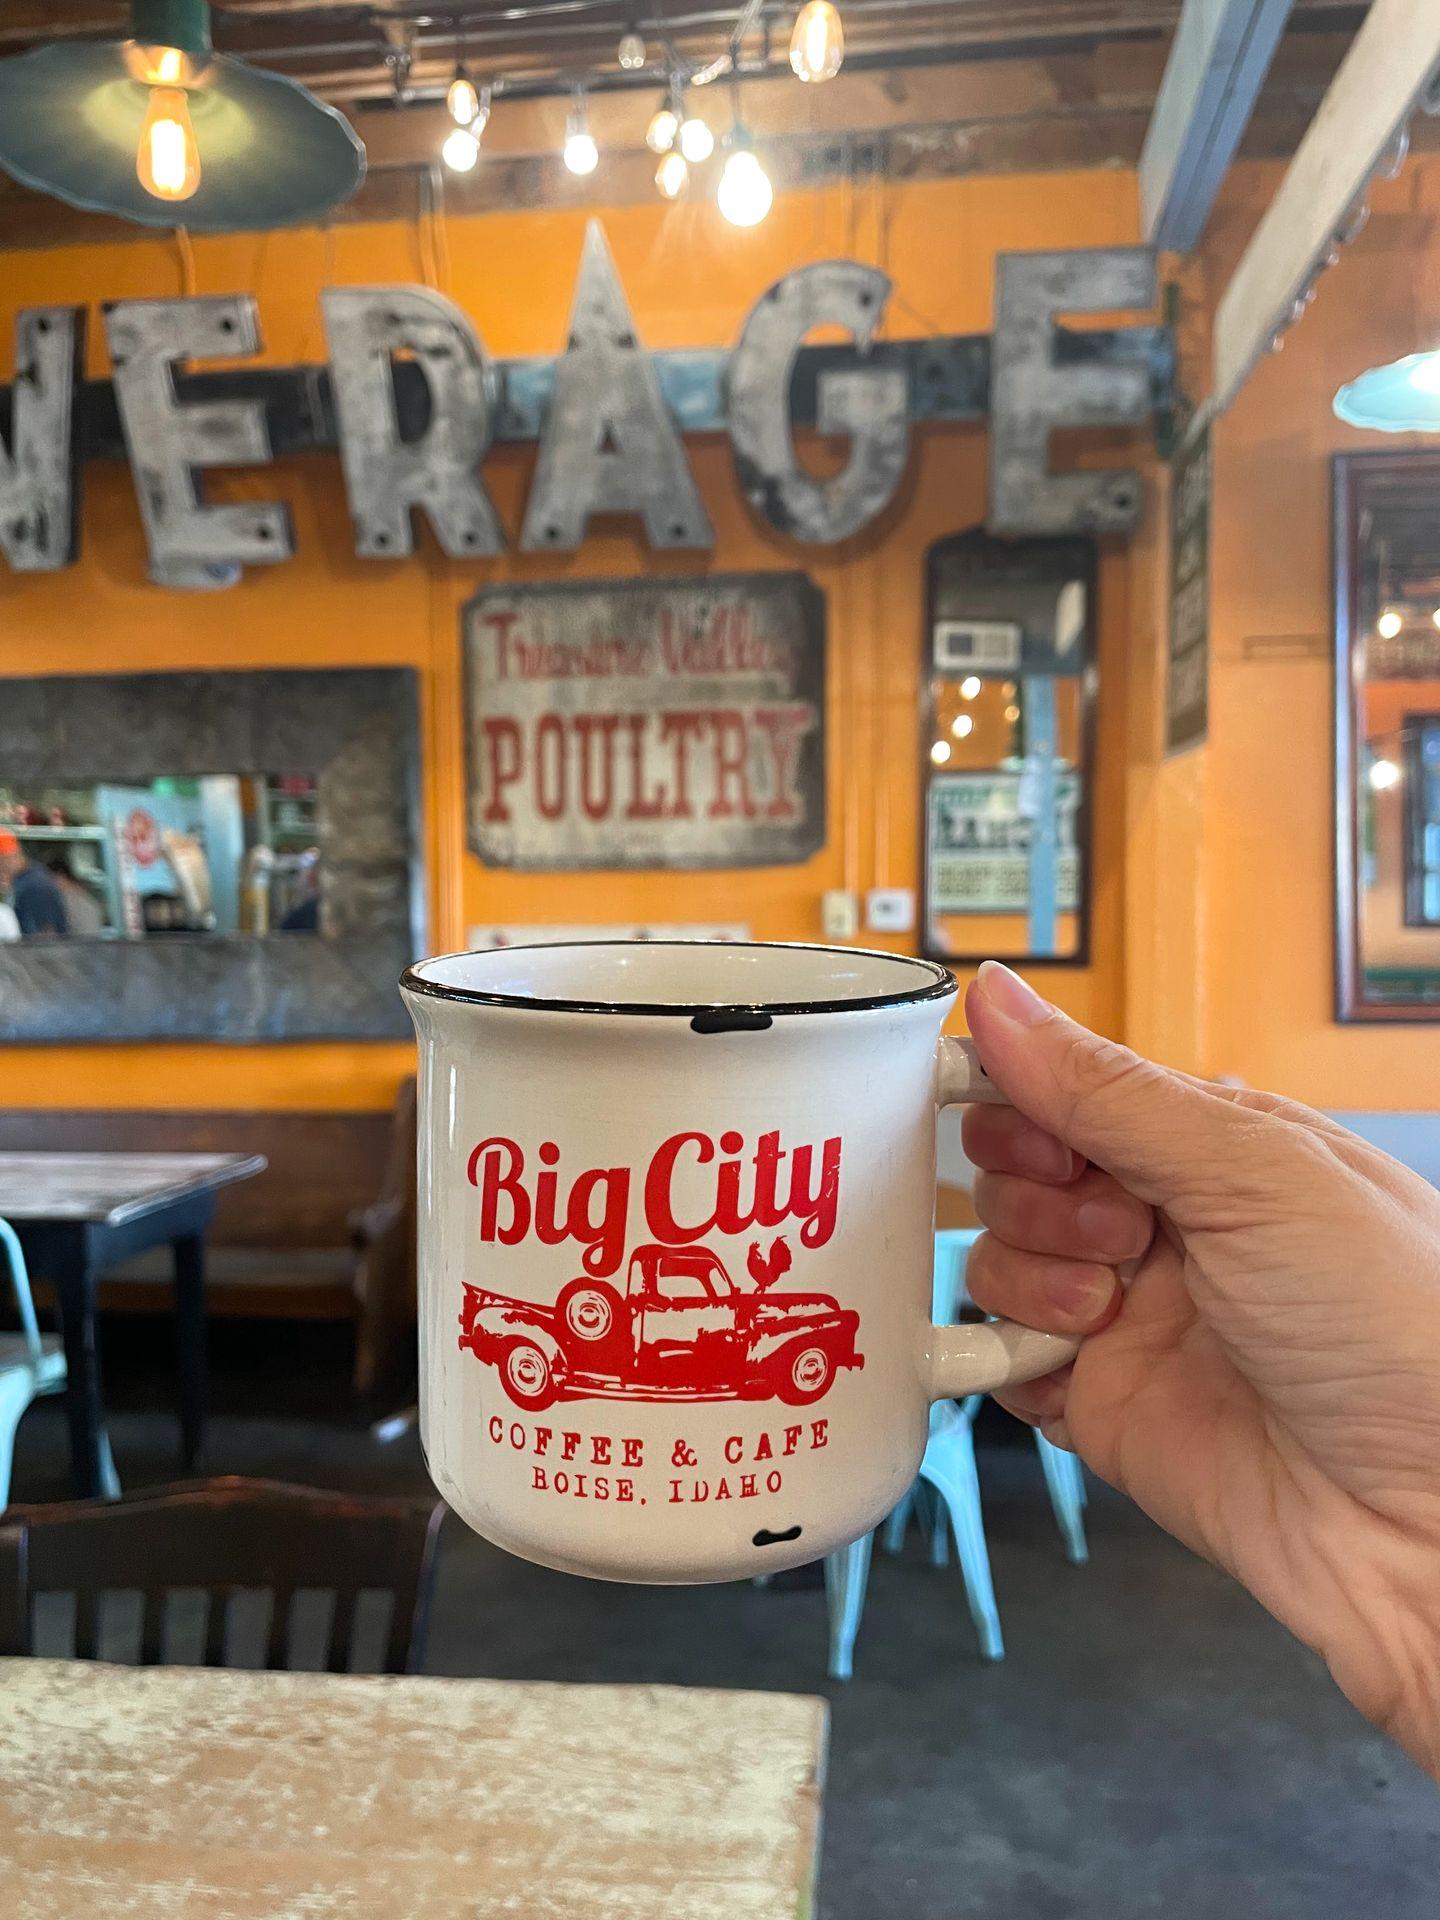 Holding up a white coffee mug that reads "Big City Coffee & Cafe, Boise, Idaho" in red letters.